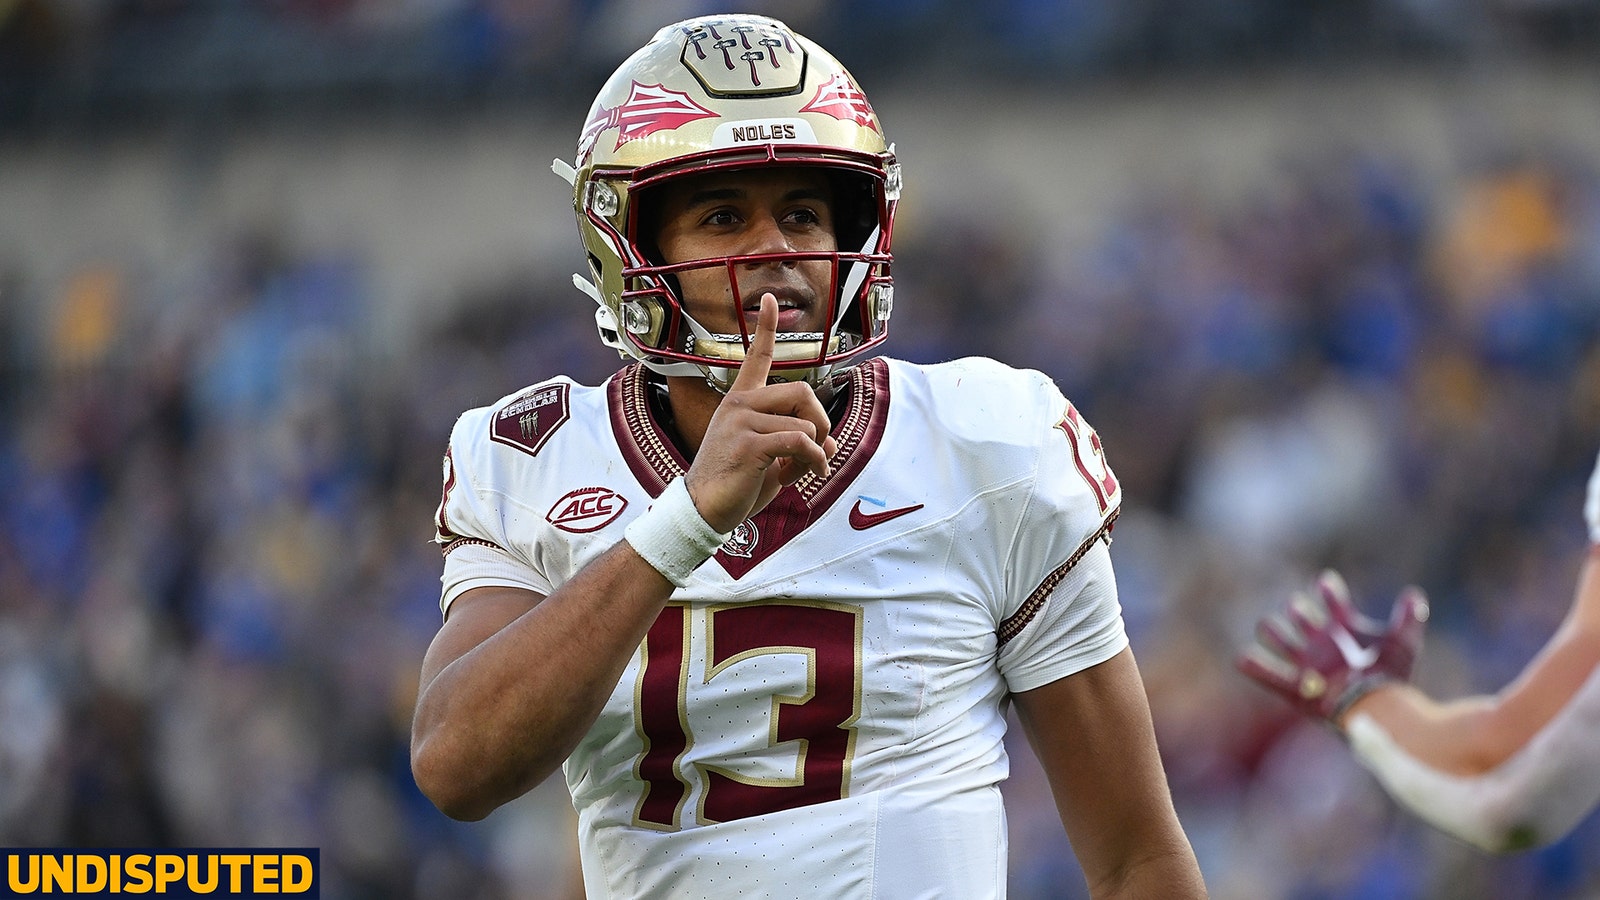 Was Florida State (12-0) snubbed in the final CFP rankings?